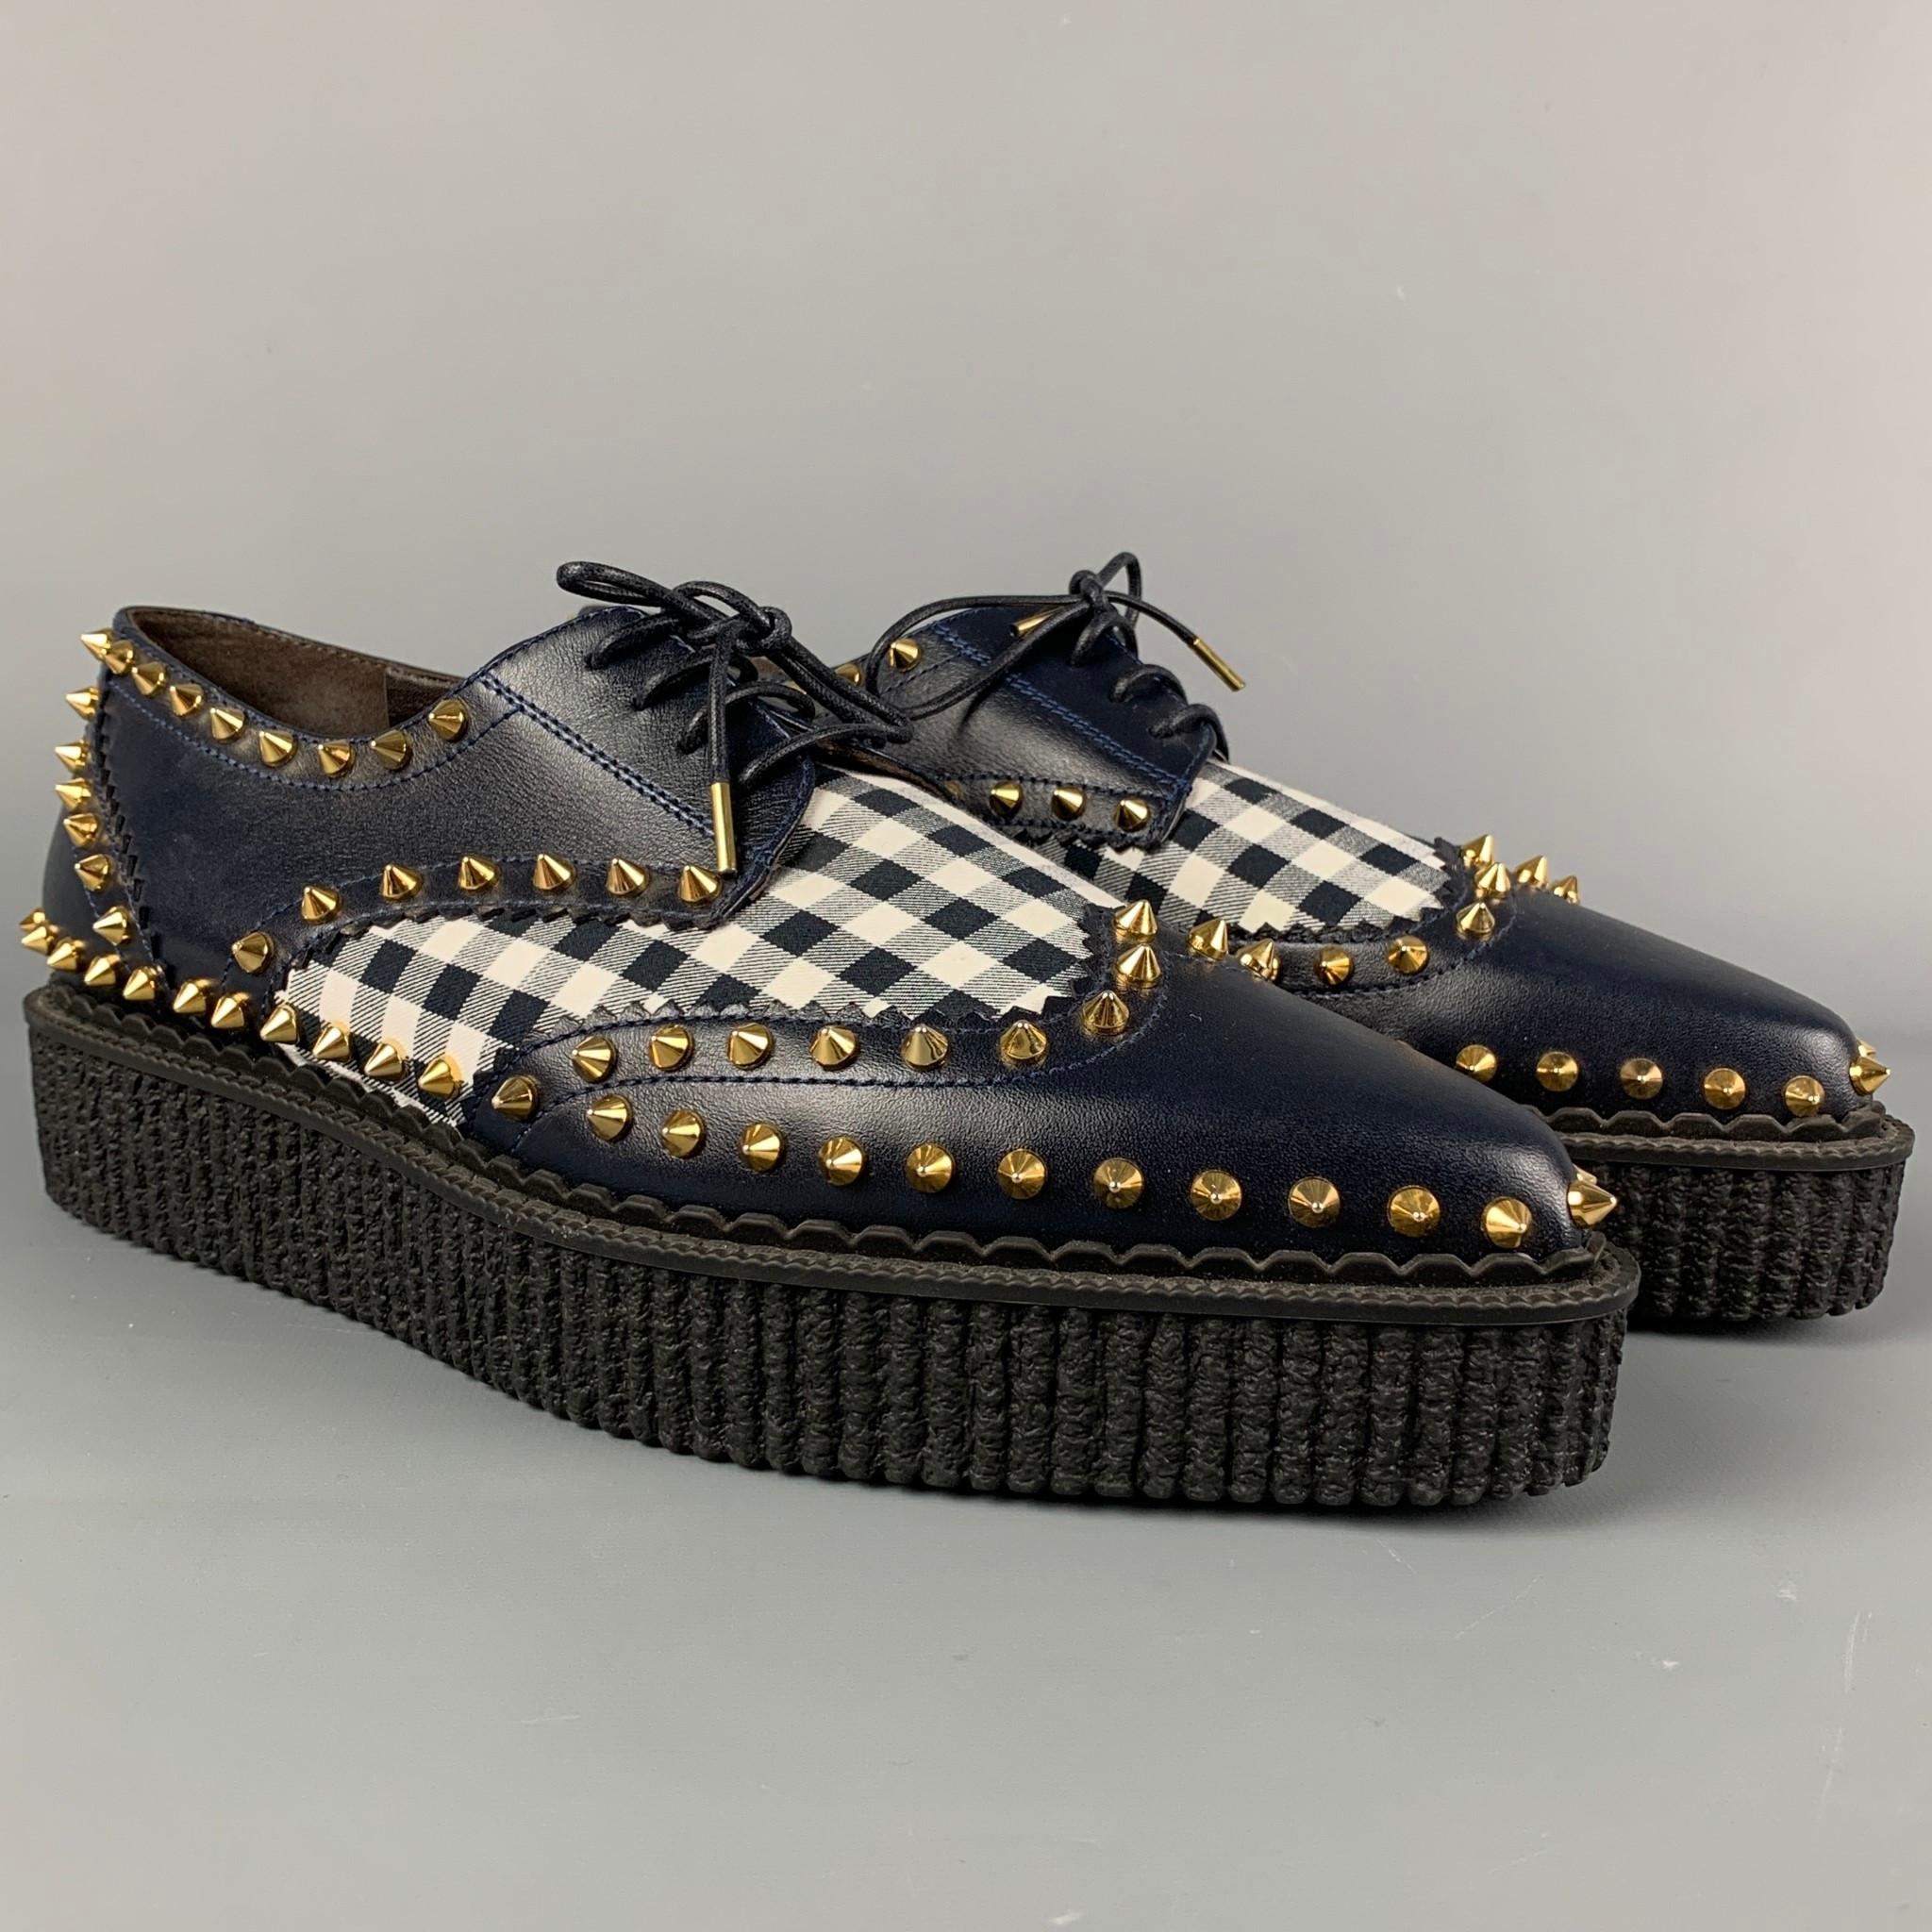 MICHAEL KORS shoes comes in a navy & white leather featuring a pointed toe, gold tone studs, platform sole, and a lace up closure. Made in Italy. 

Excellent Pre-Owned Condition.
Marked: 41

Length: 11.5 in.
Width: 3.75 in.
Platform: 1.25 in. 